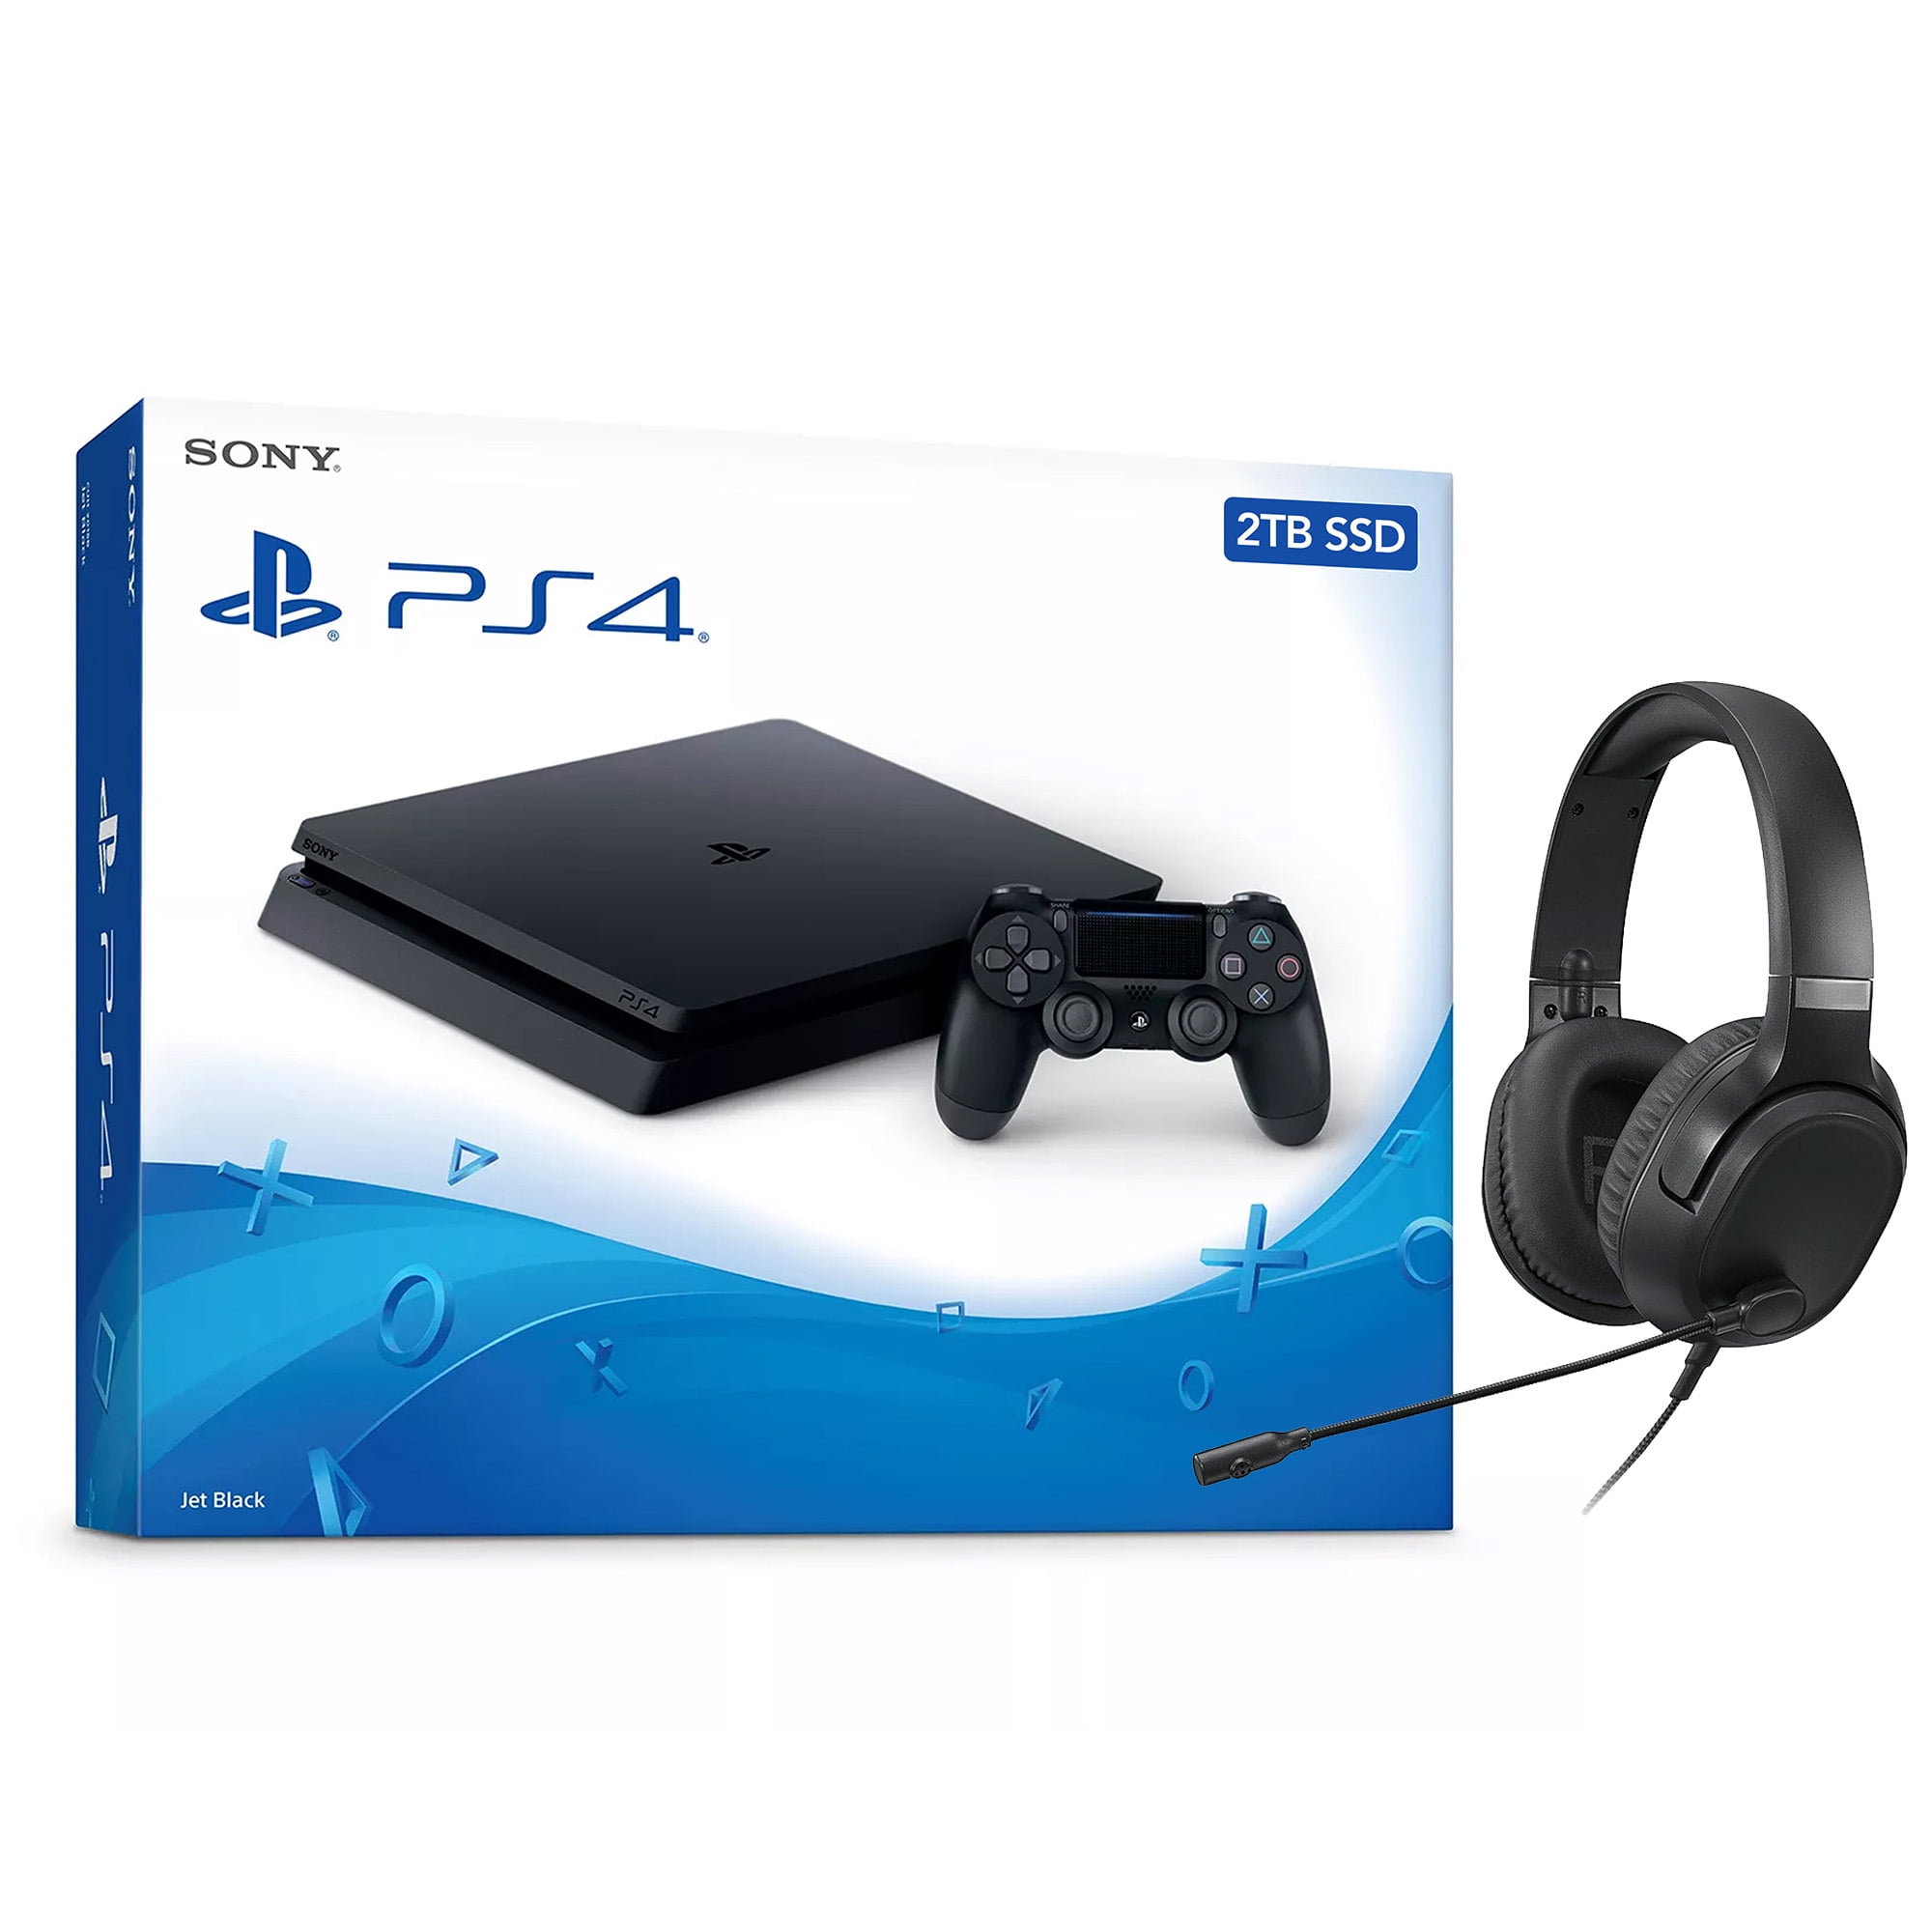 Sony PlayStation 4 Slim Storage Upgrade 2TB SSD PS4 Gaming Console